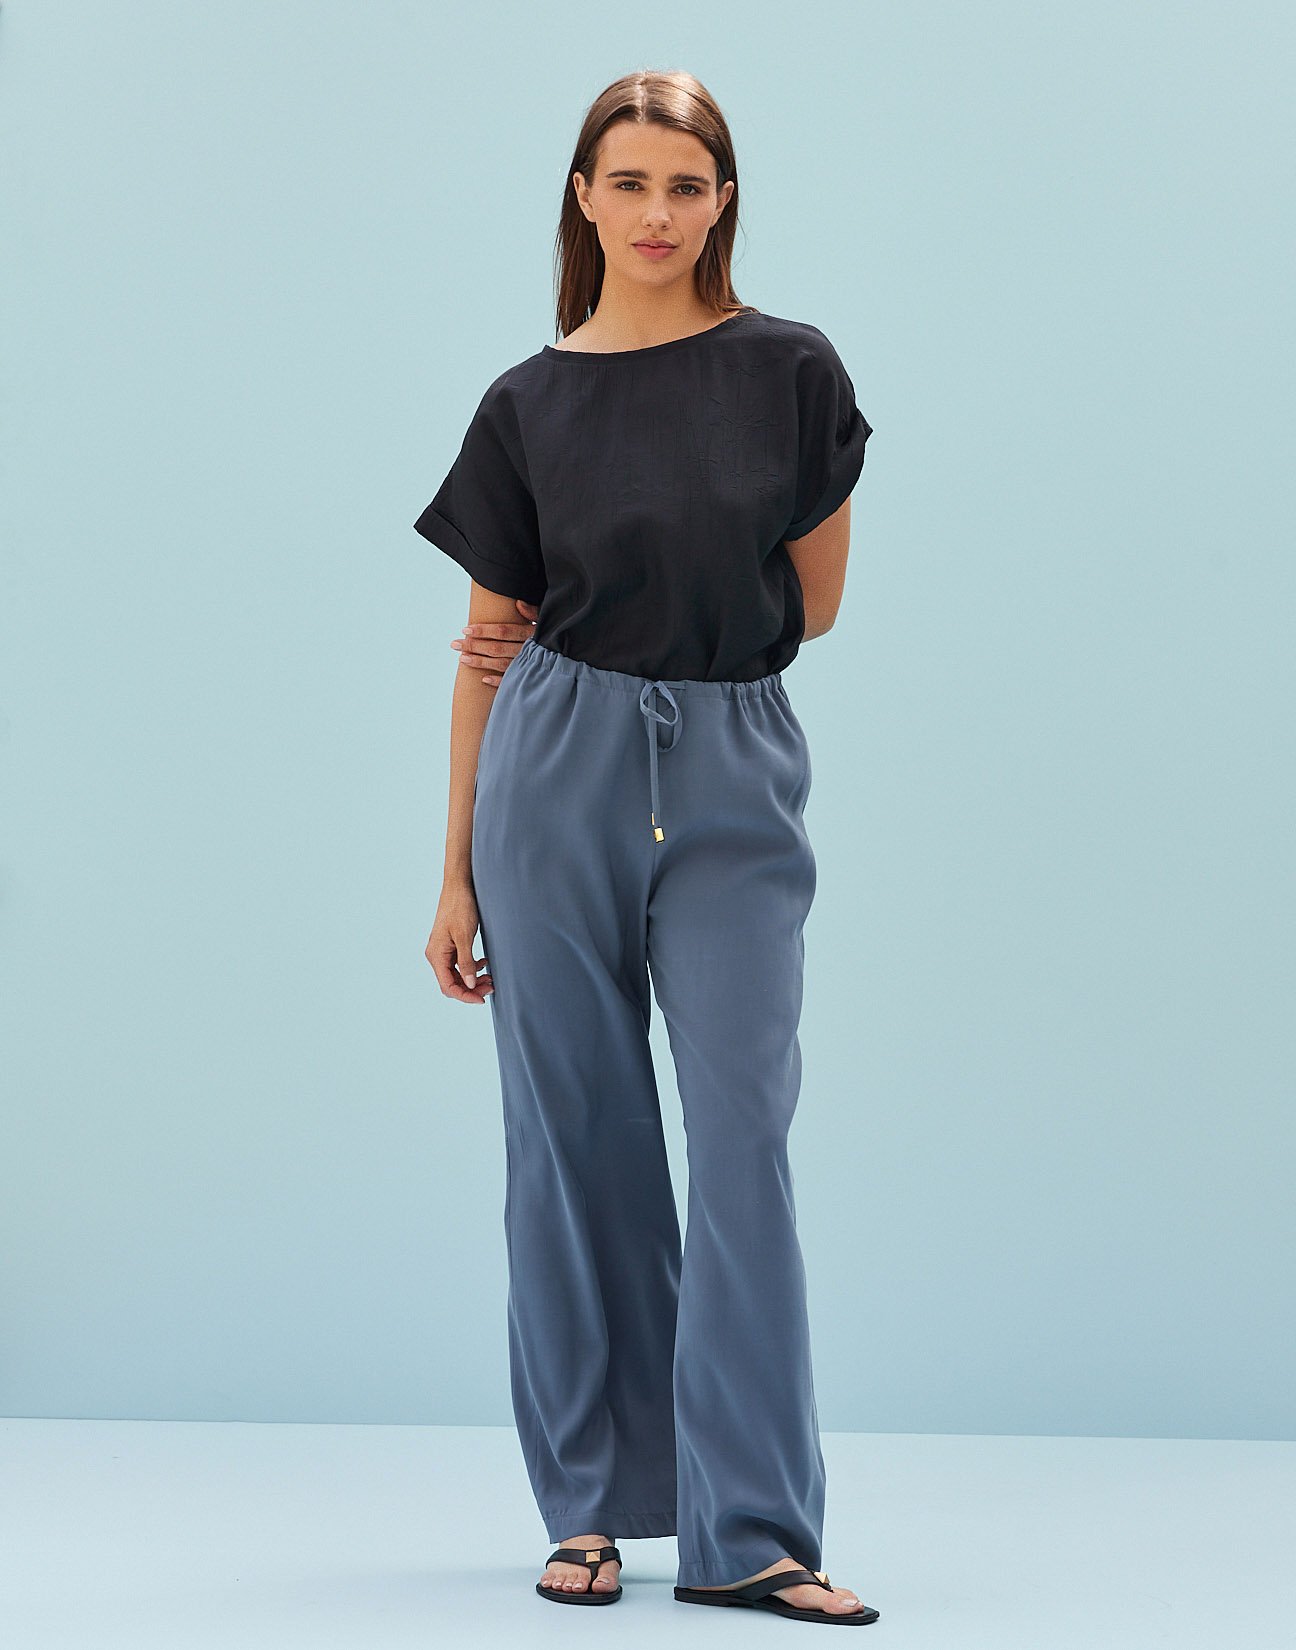 Gathered trousers